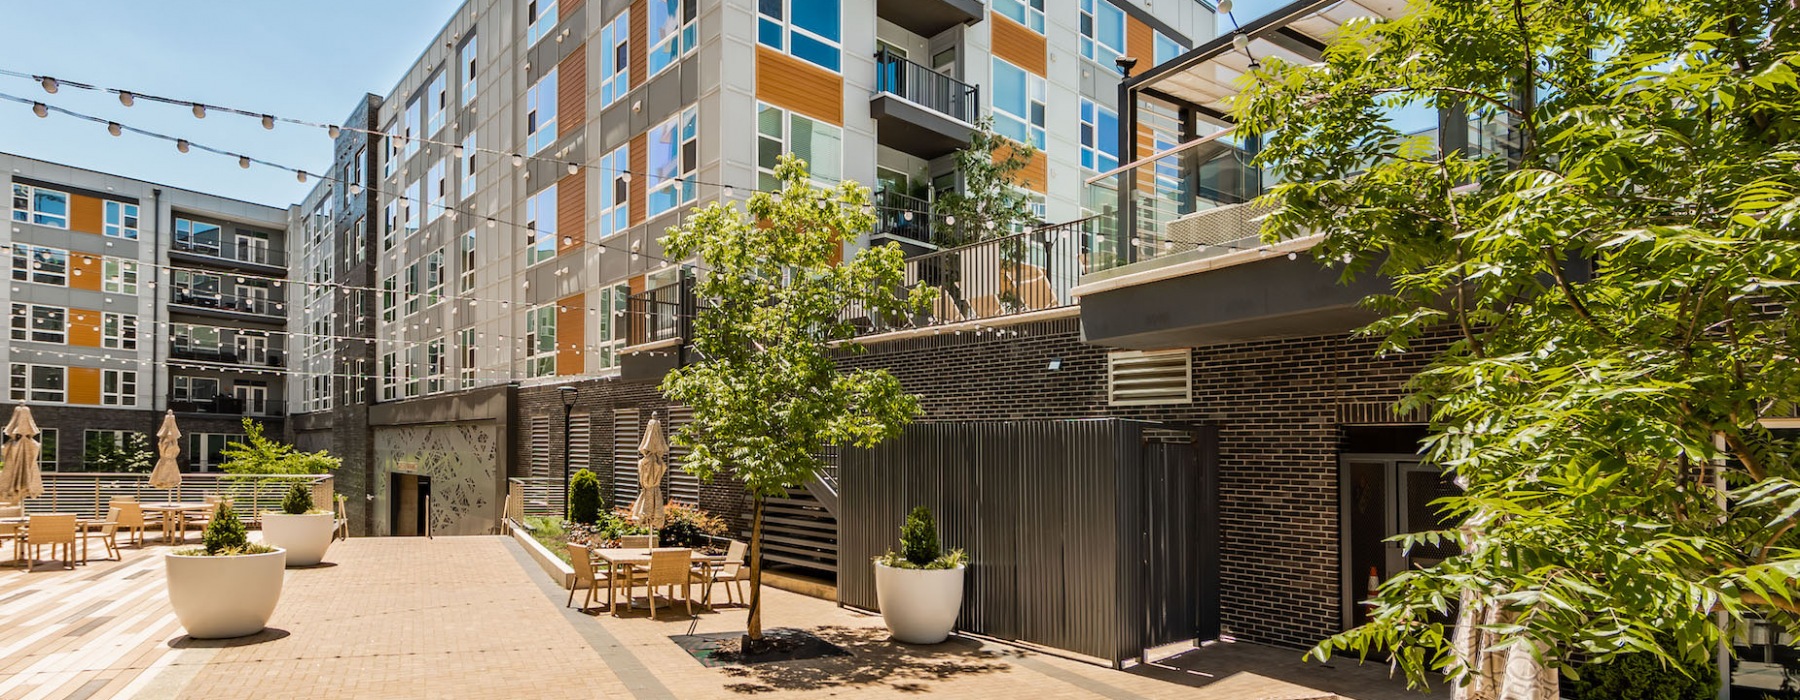 Outdoor courtyard at Uptown 550